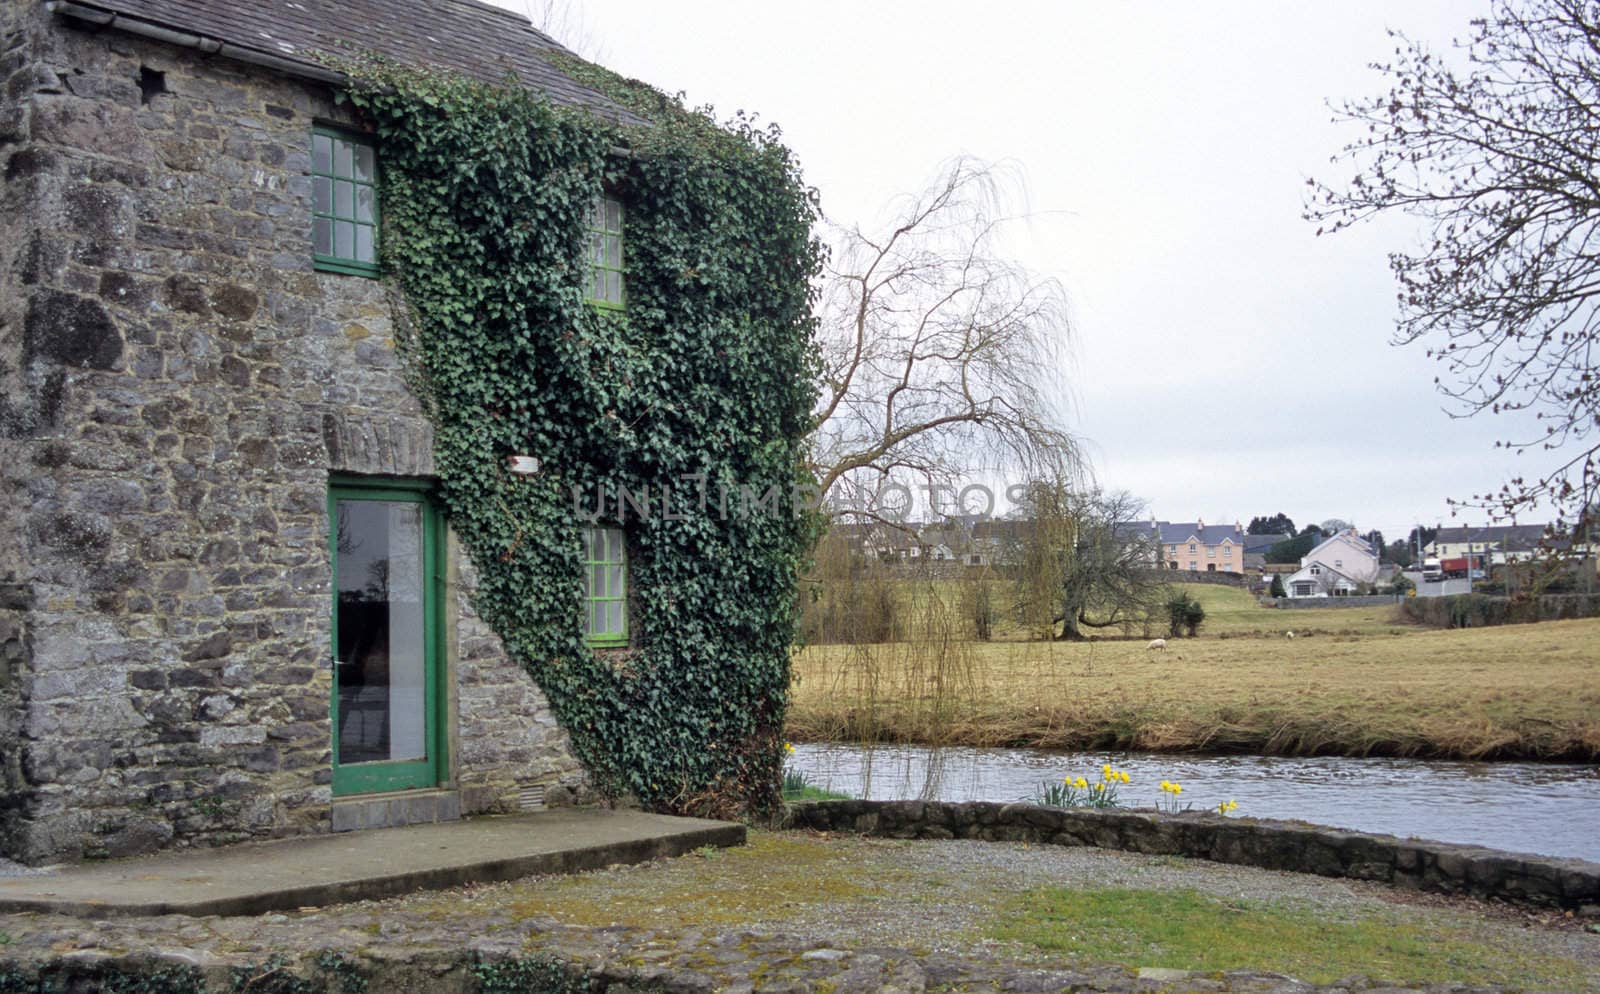 An old stone house sits by a river in an Irish village